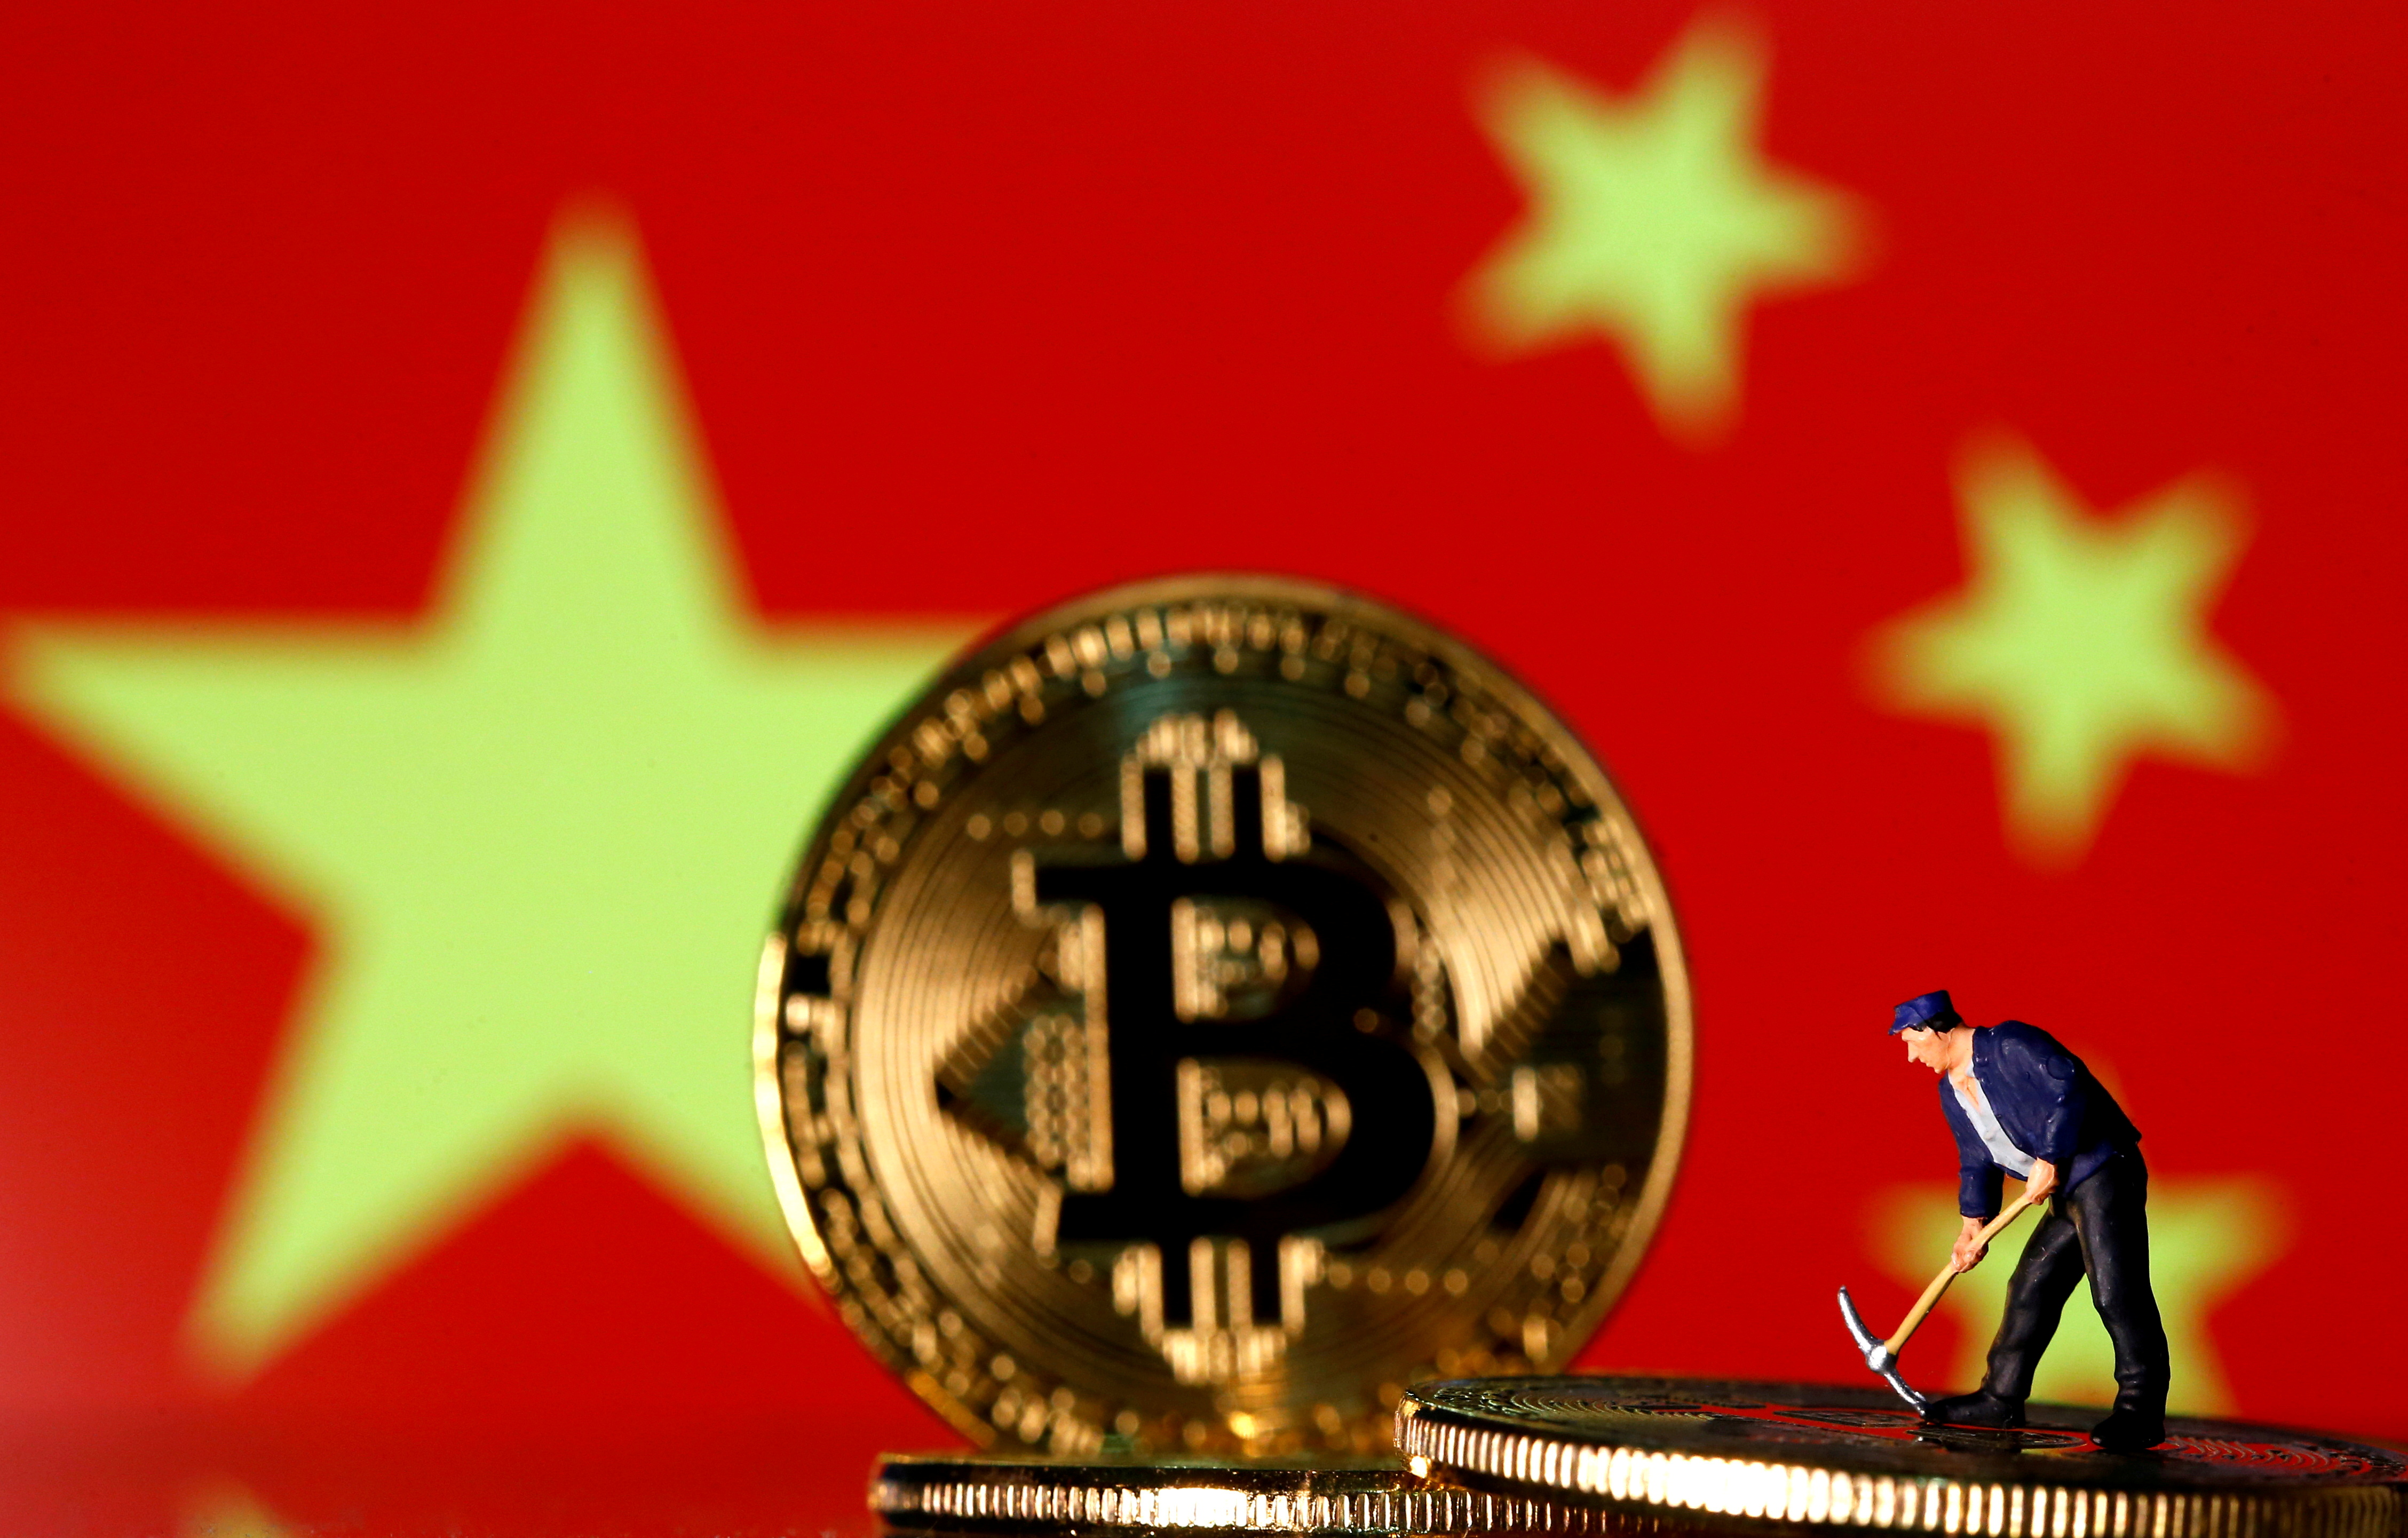 Picture illustration of a small toy figurine and representations of the Bitcoin virtual currency displayed in front of an image of China's flag